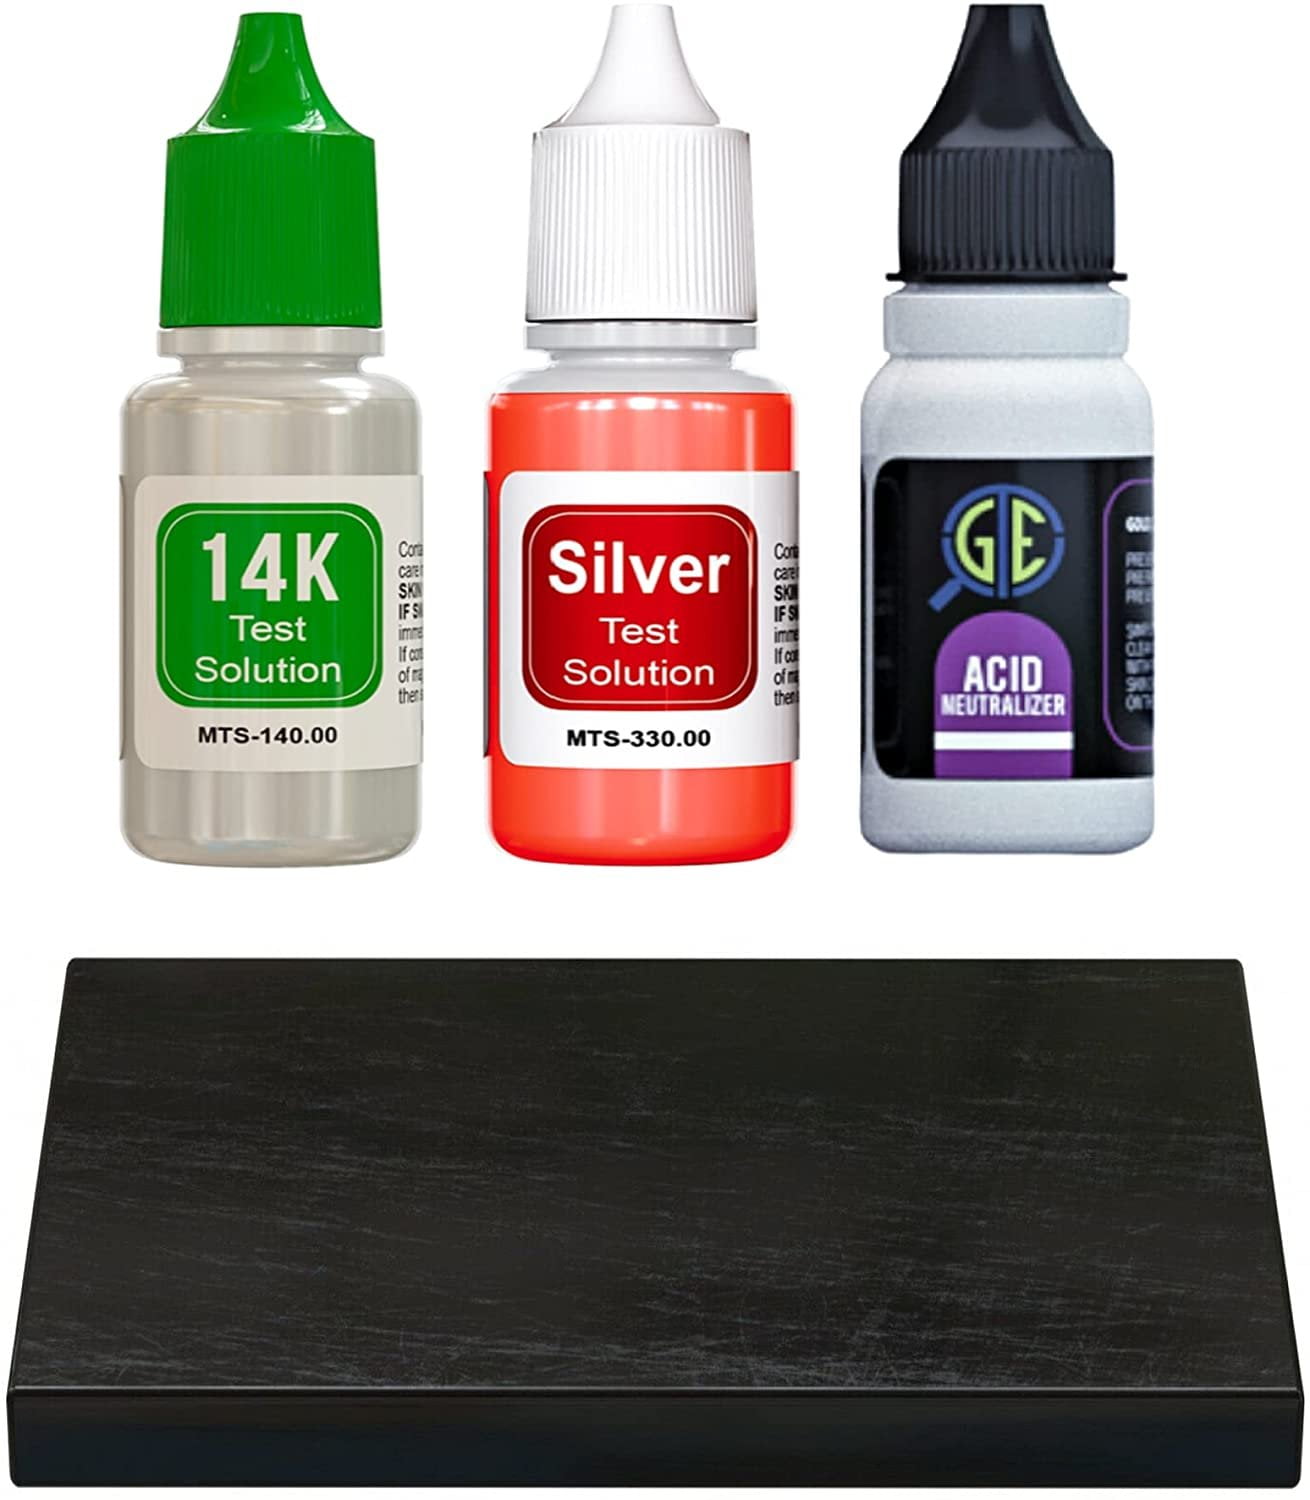 Gold and Silver Test Kits Gold Testing Acids from Kassoy